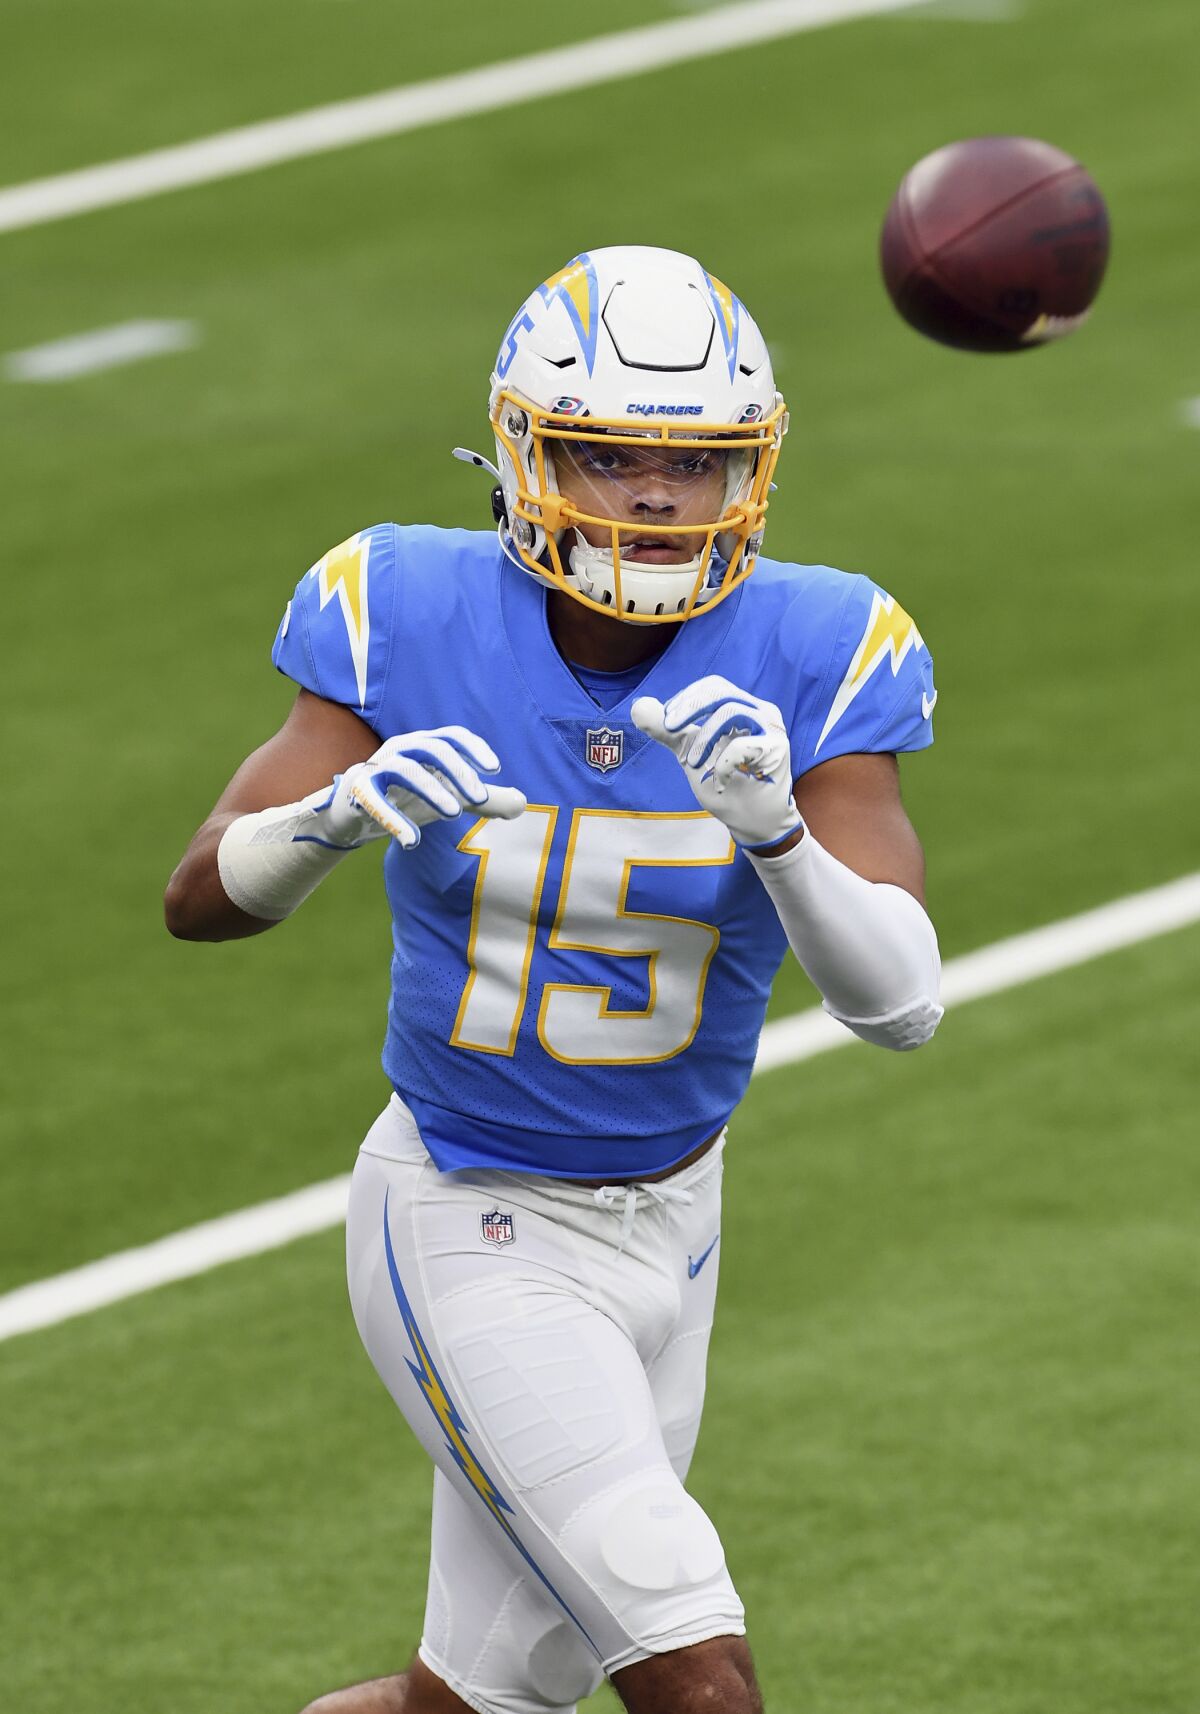 Chargers wide receiver Jalen Guyton catches passes before a game.